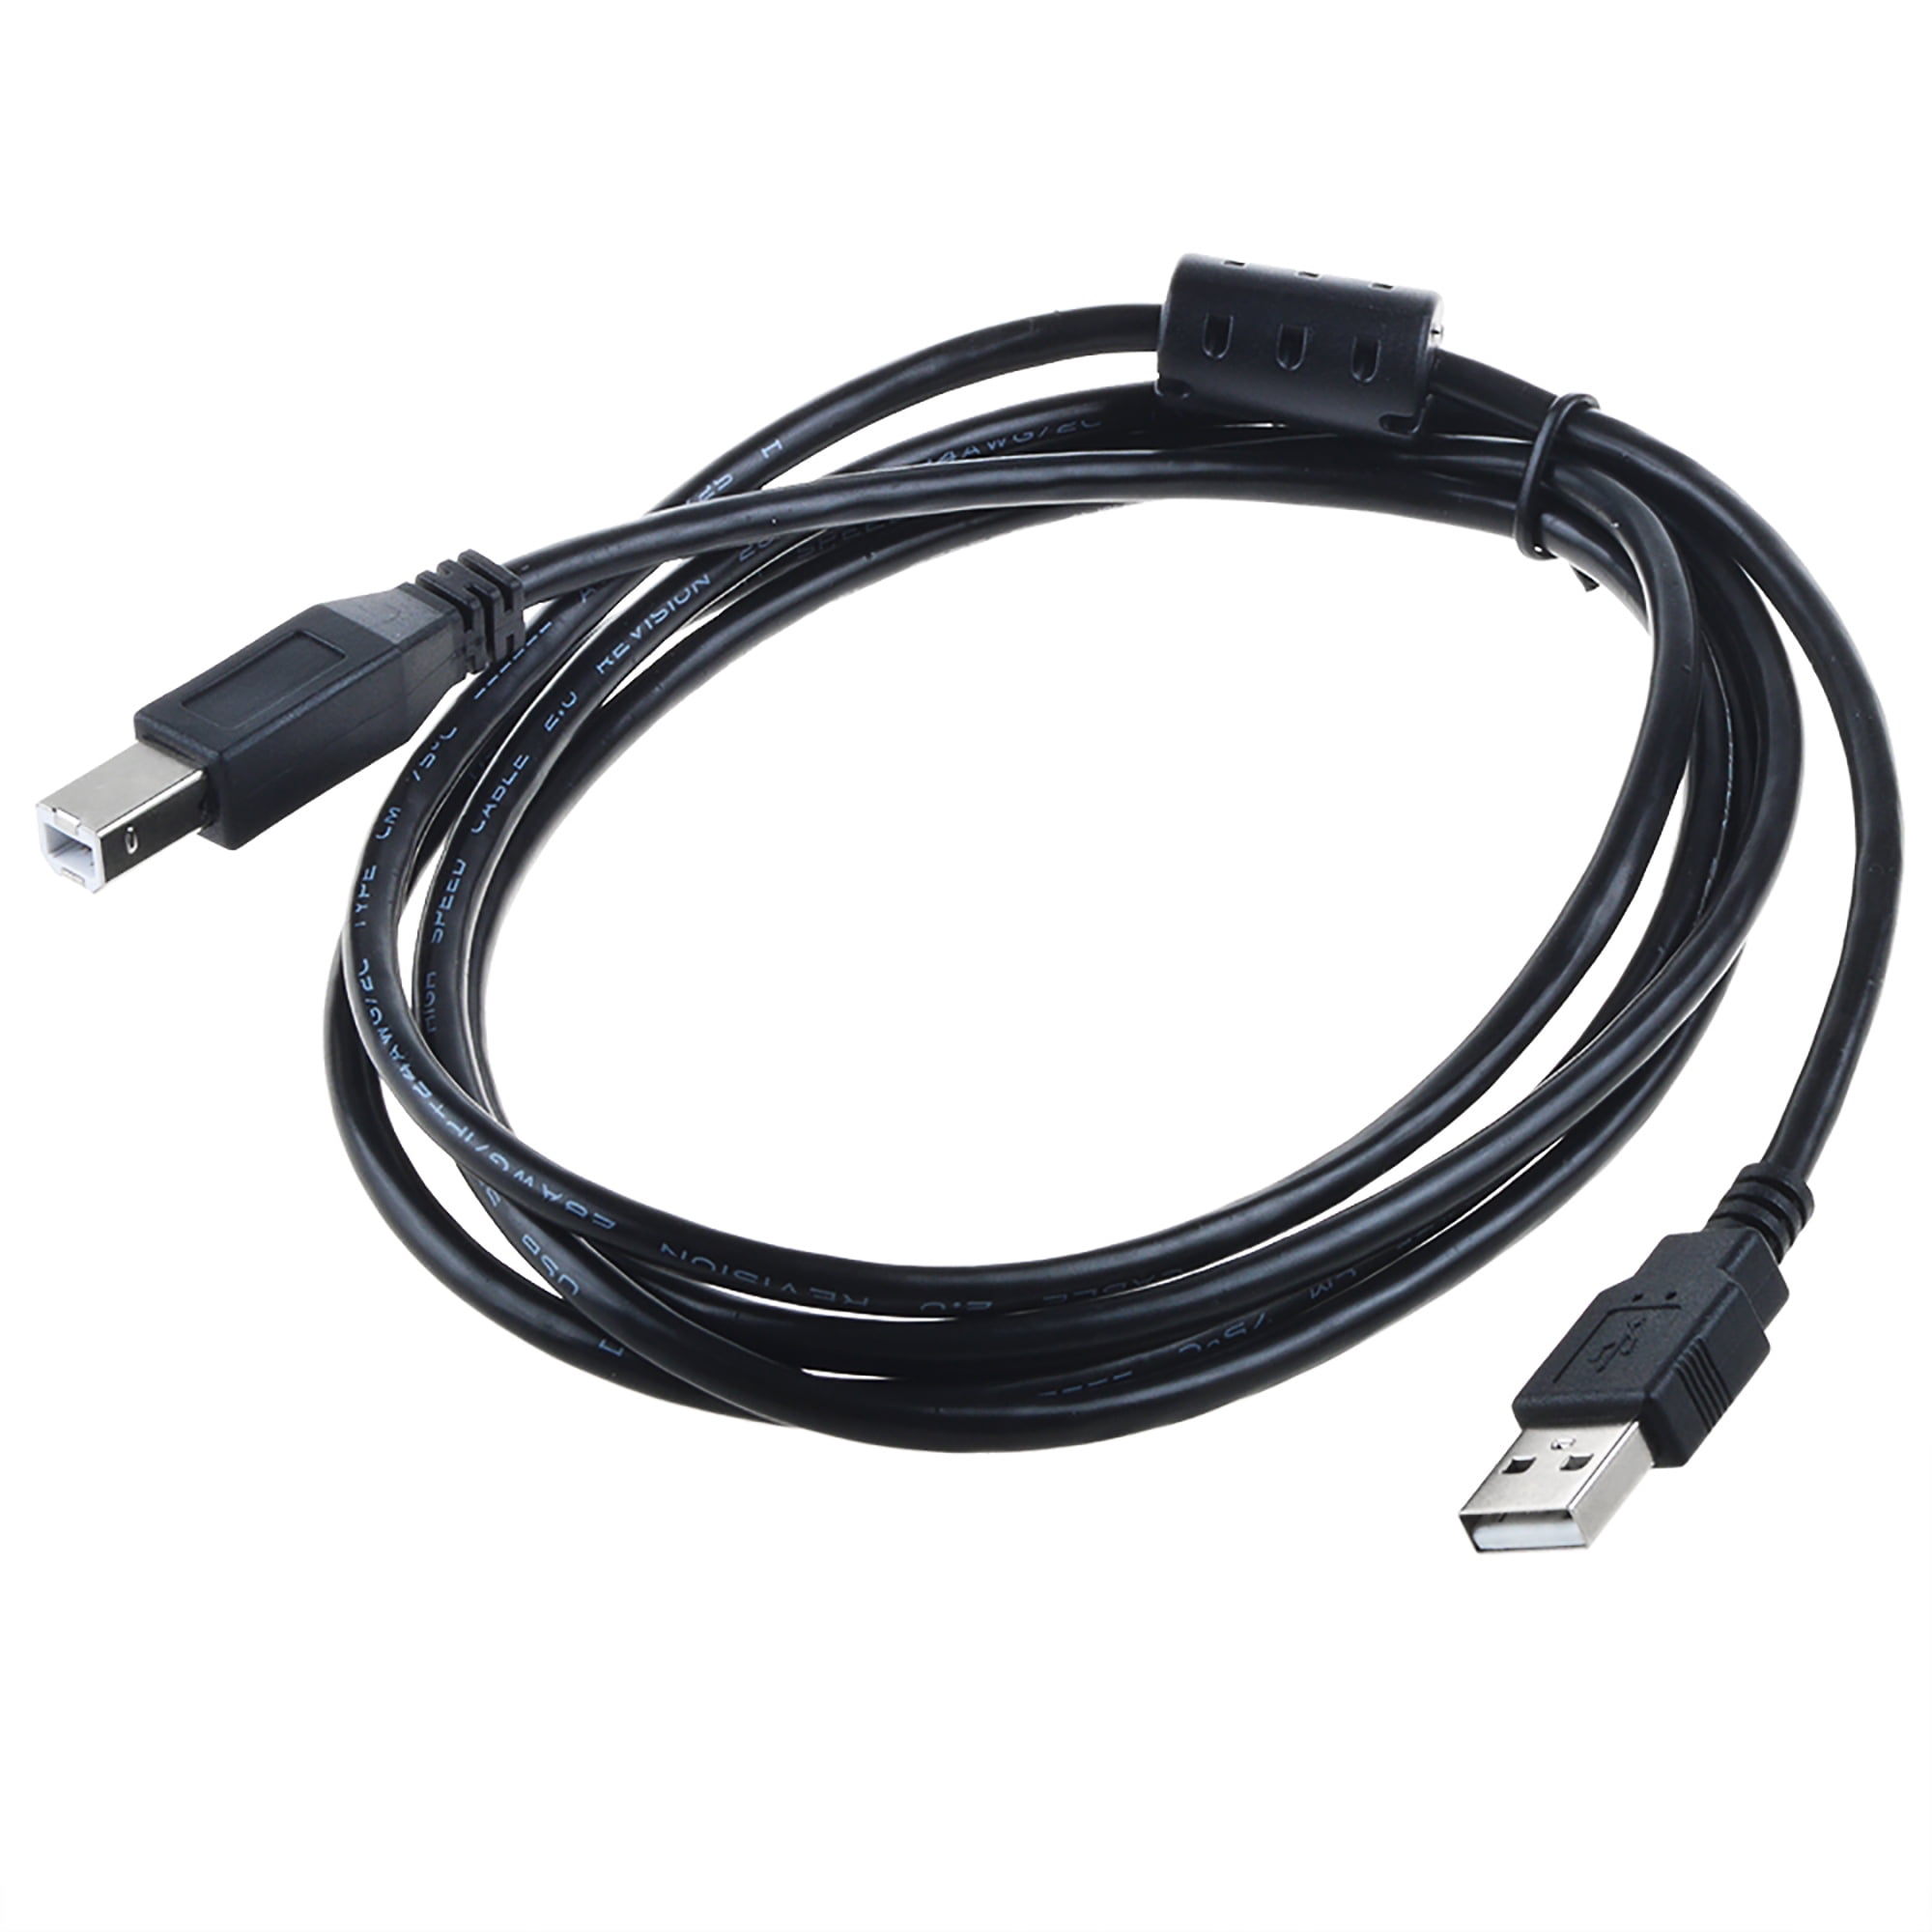 PKPOWER 6ft USB Cable PC Laptop Data Sync Cord For MOTU Track16 Track Studio FireWire/USB Interface - Walmart.com